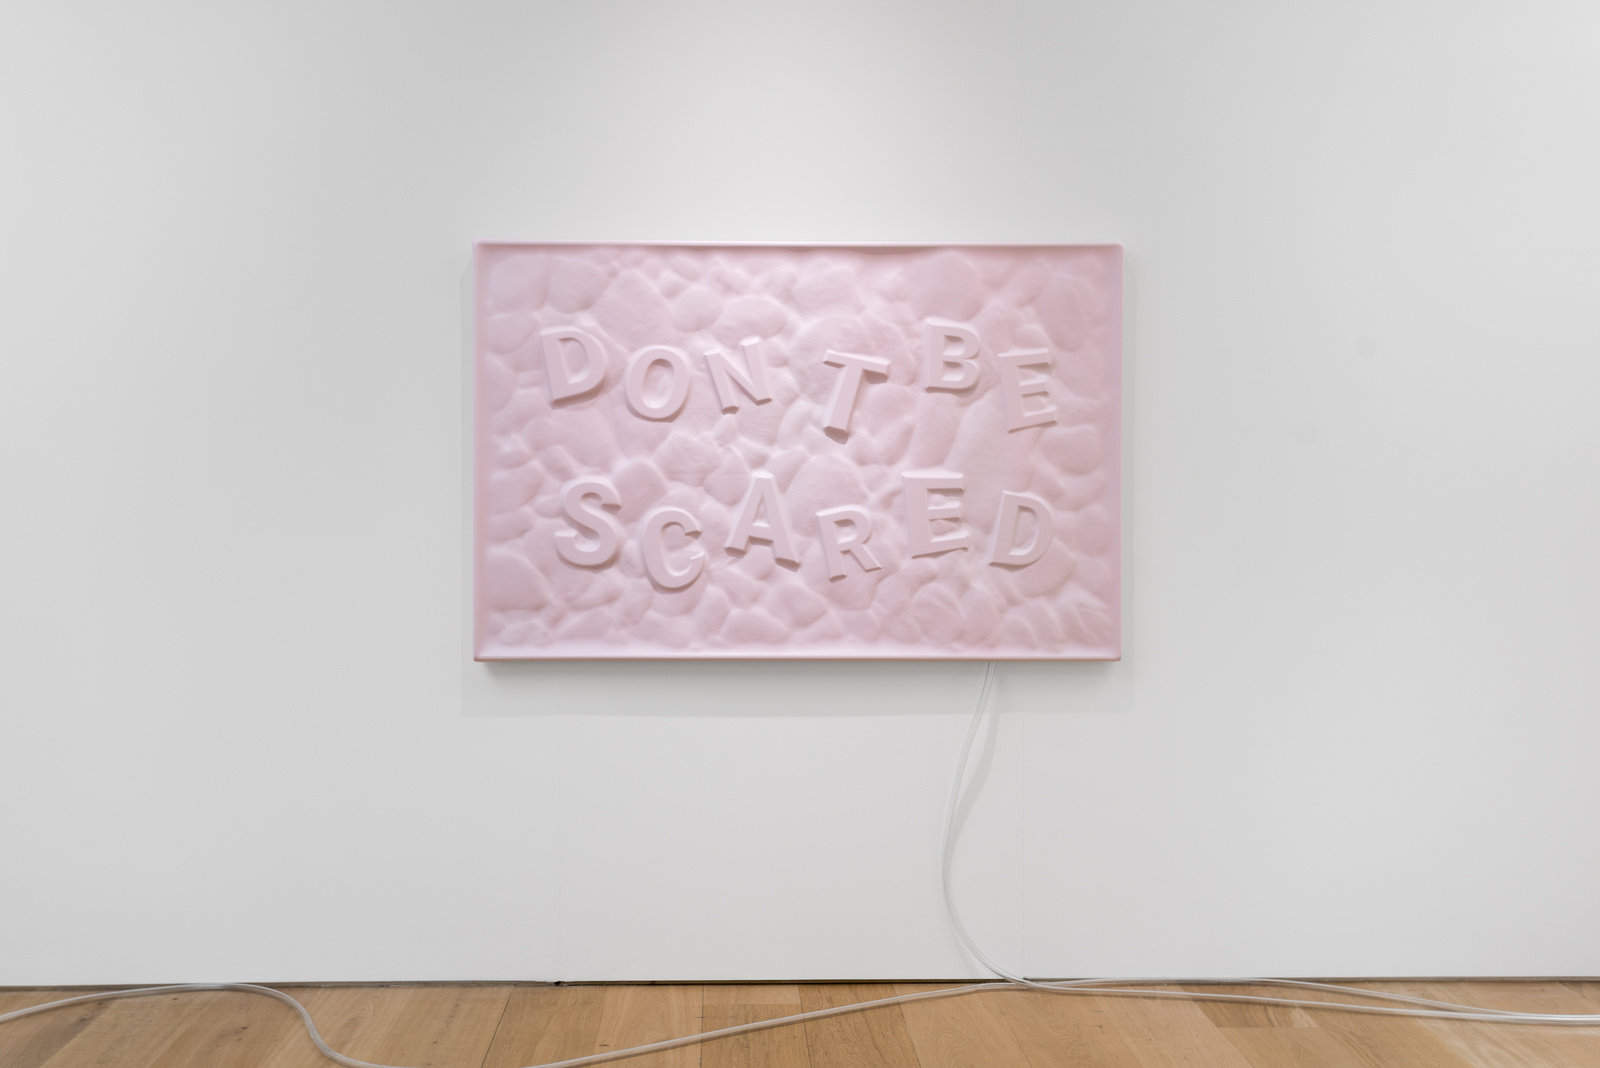 Catala, don’t be scared (sweet roses), 2018, silicone, wood, high density foam, pump, ed. of 3 and 2ap, 66 1 2 x 43 in., 168.91 x 109.22 cm, cnon 60.410